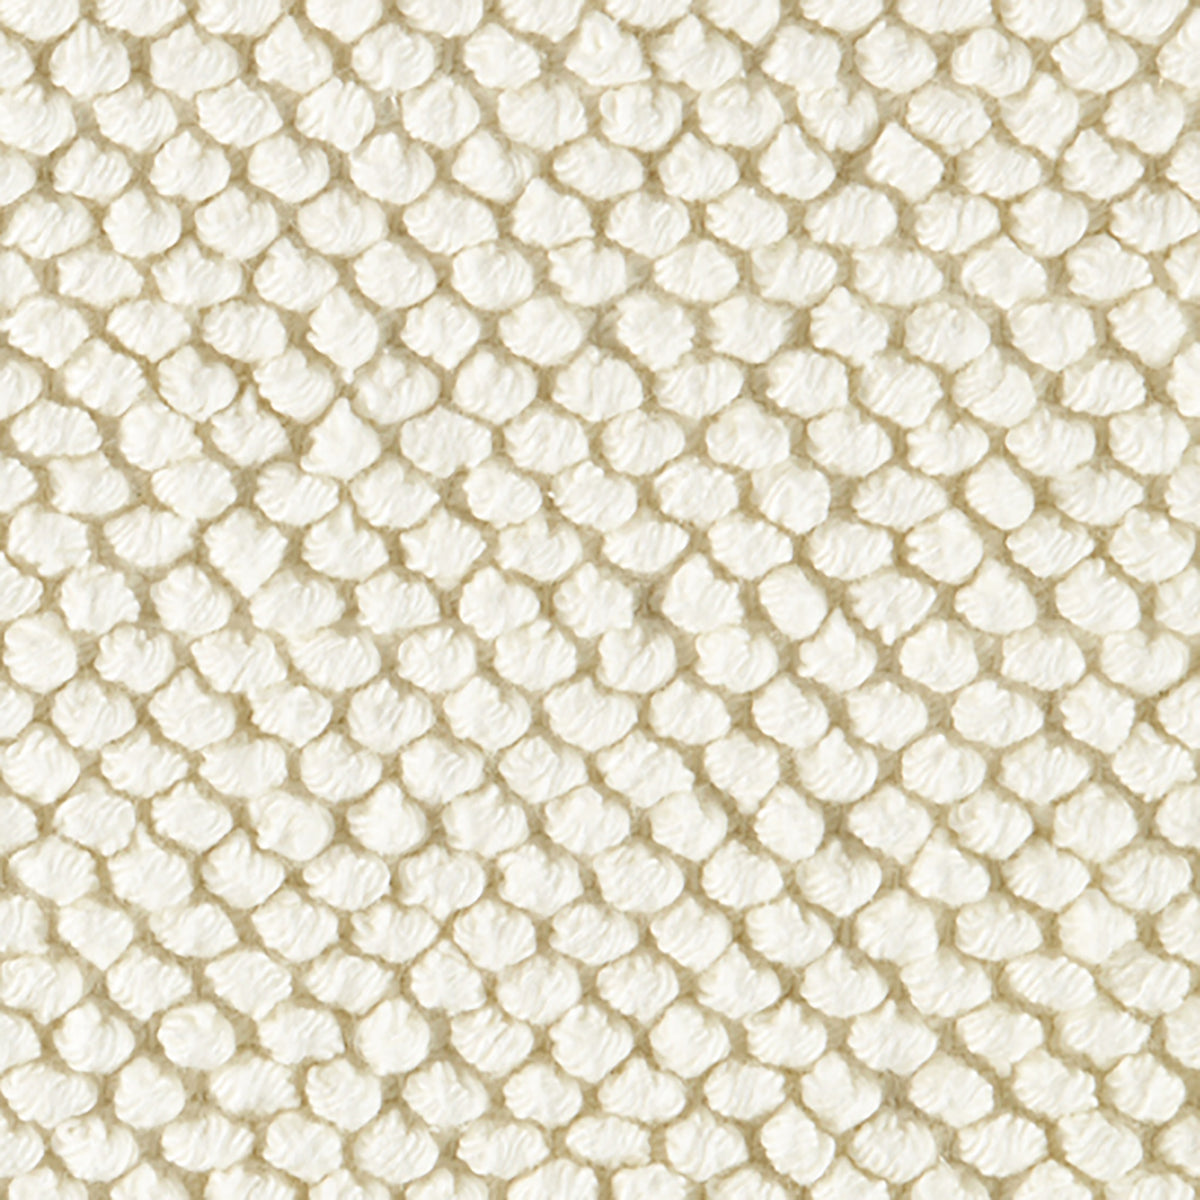 Swatch Sample of Matouk Reverie Bath Rugs in Color Ivory